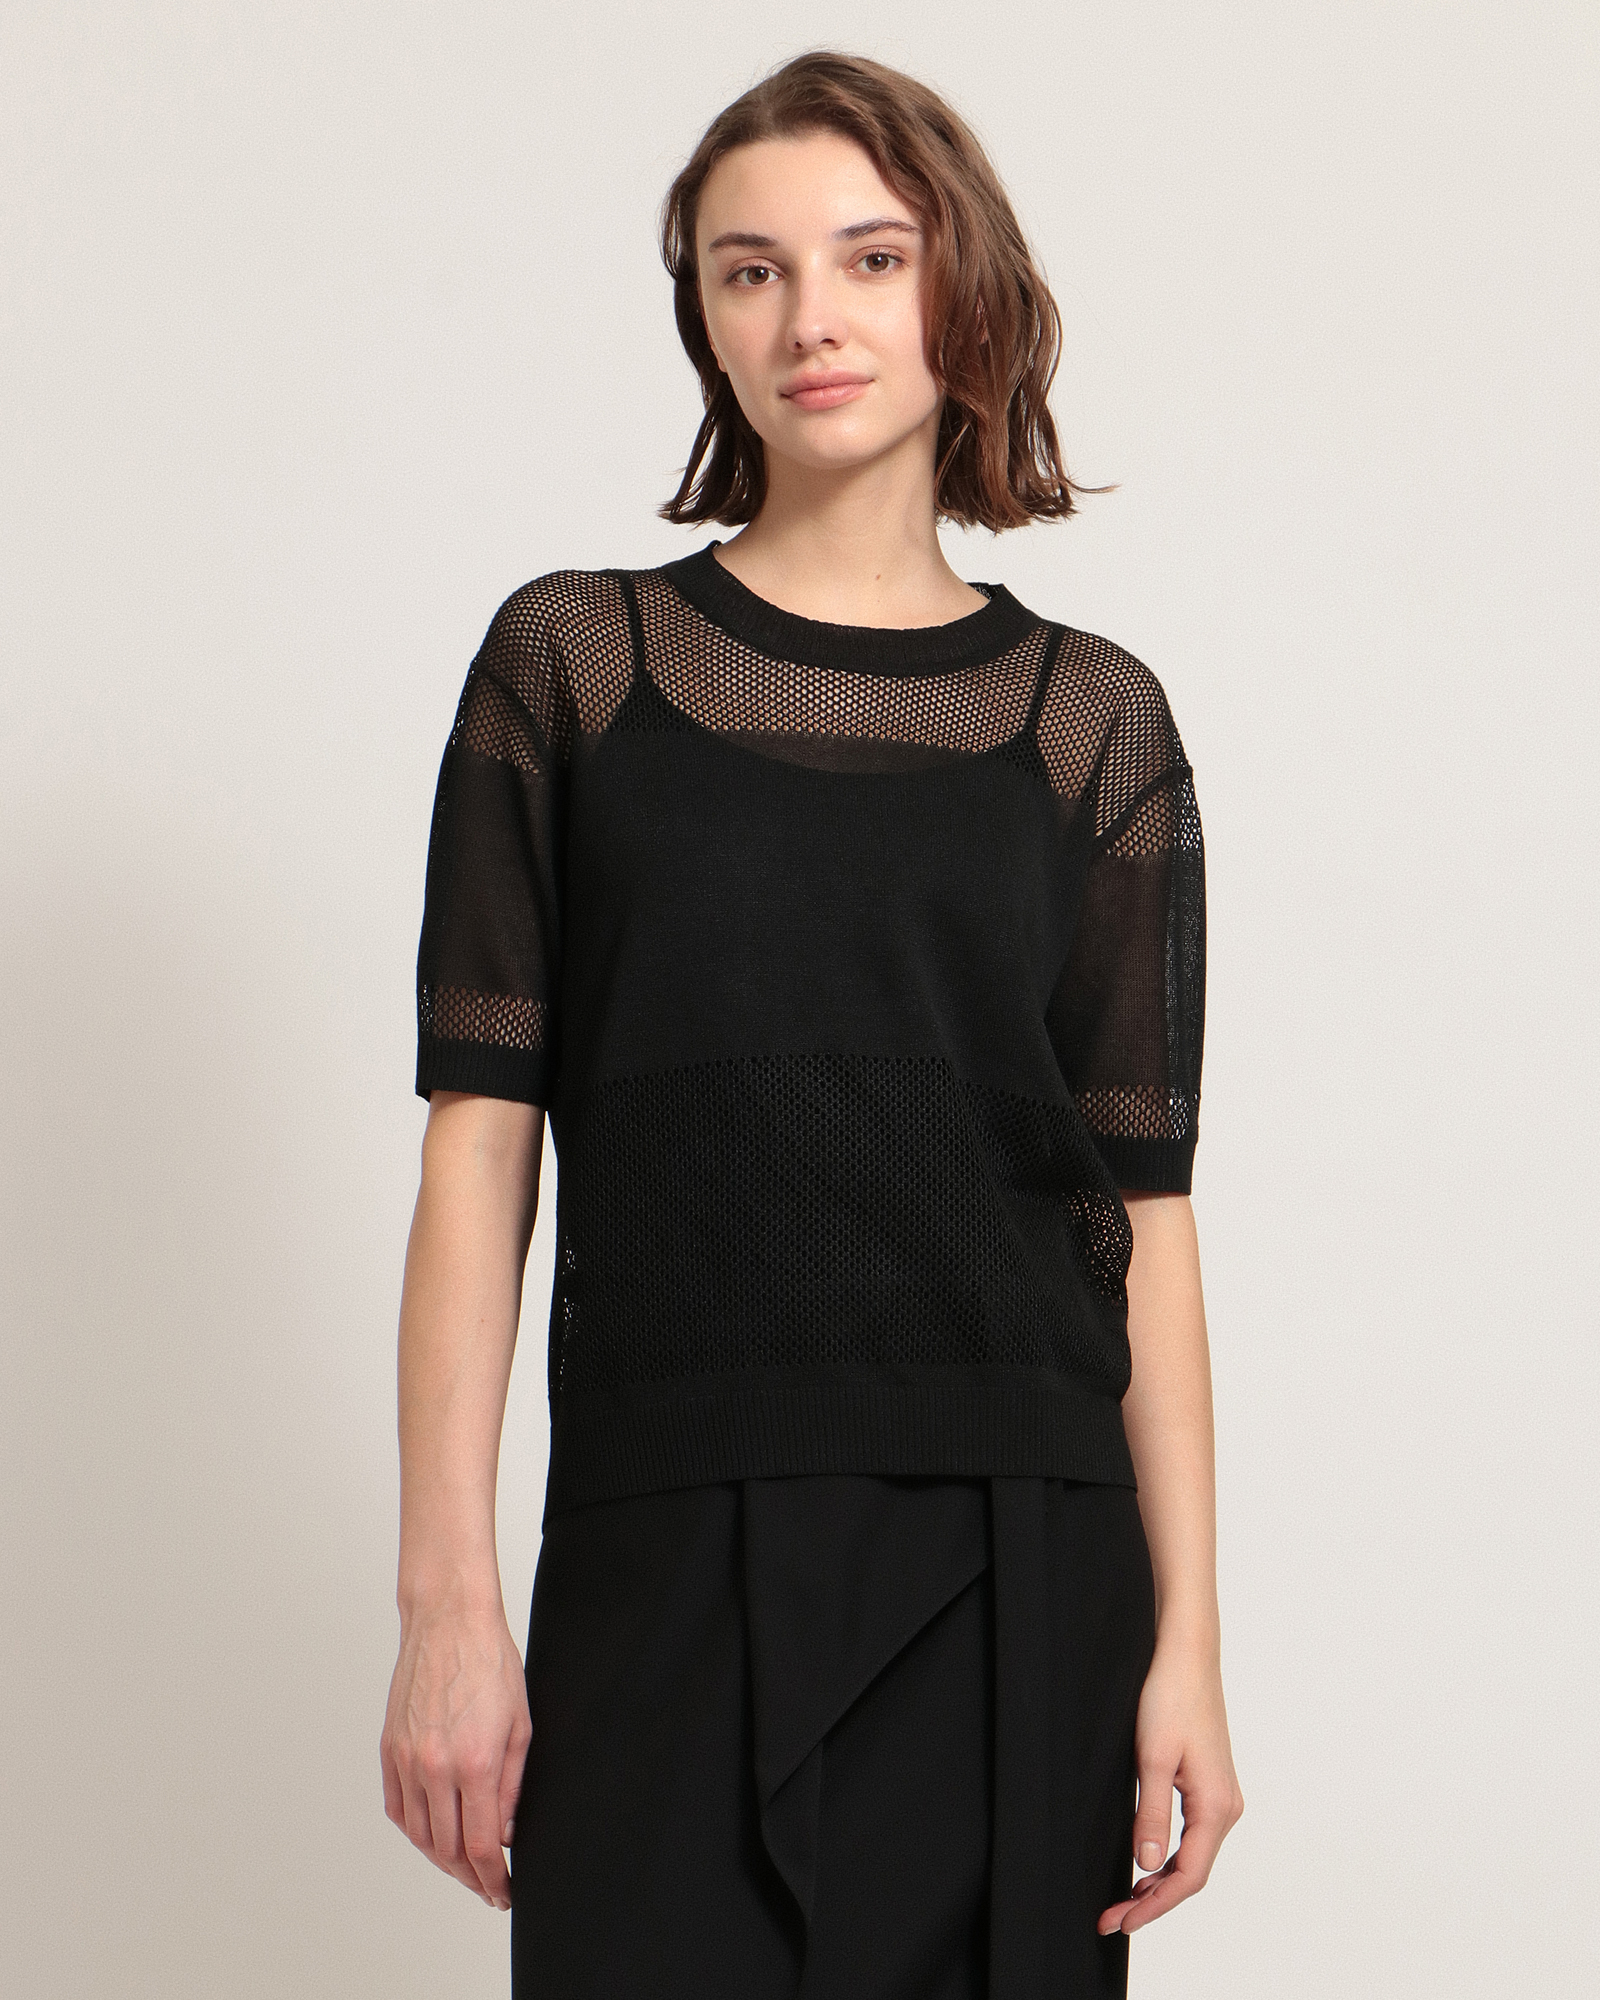 Sheer Knit Pierre | Theory luxe[セオリーリュクス]公式通販サイト